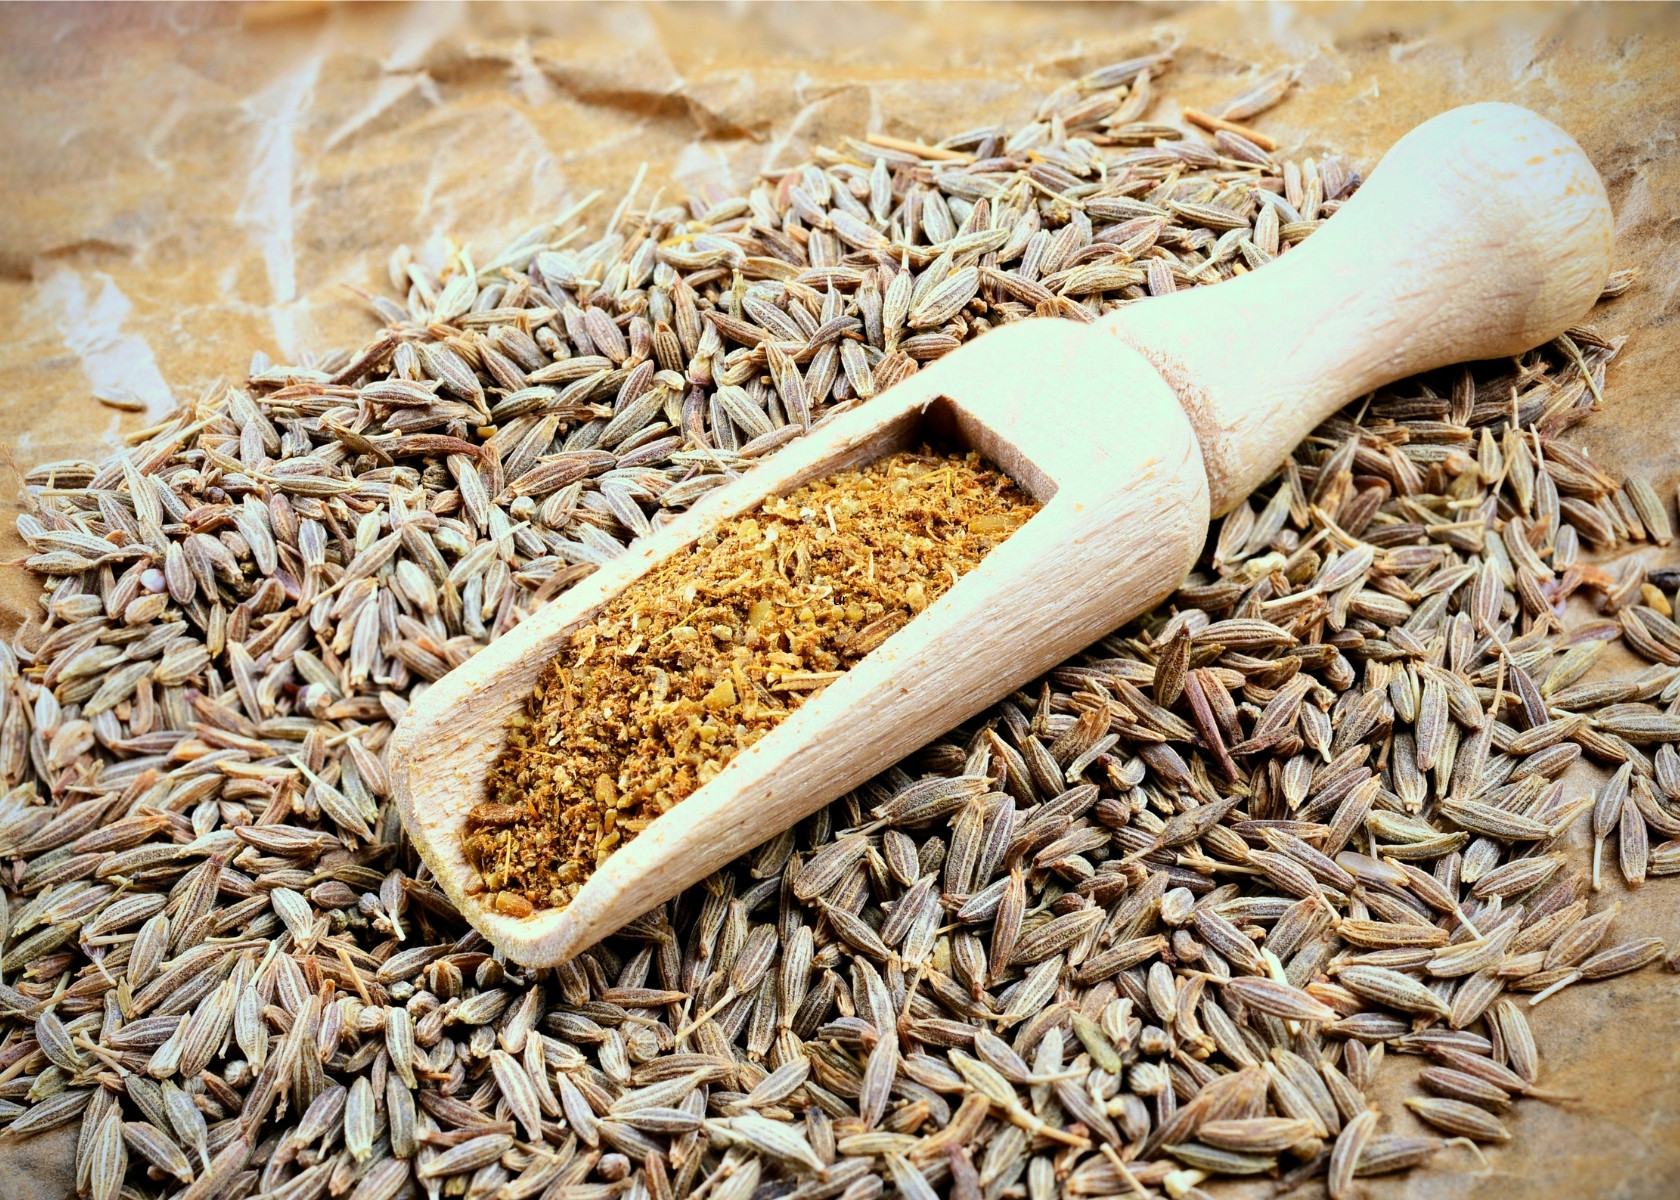 Ground cumin in large wooden spoon on top of large mound of cumin seeds.